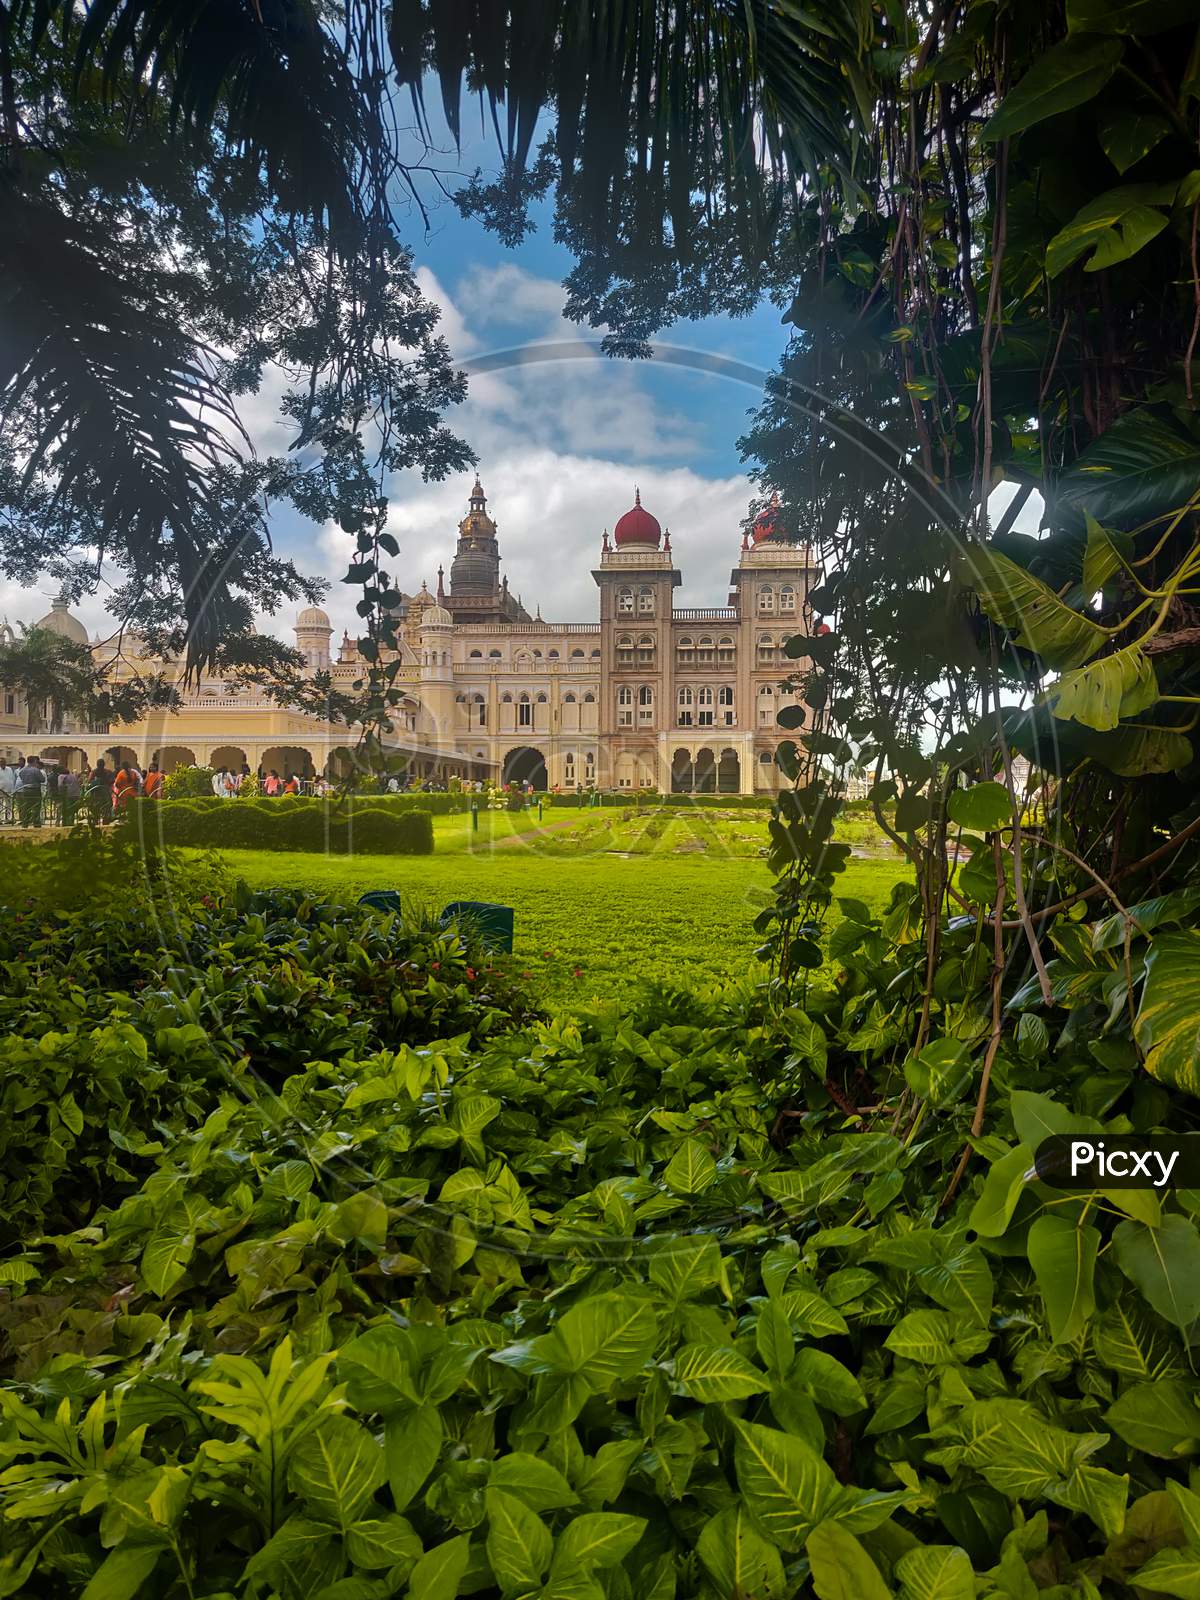 Side View Of Mysore Palace From Between Trees And Bushes In Mysore, India.